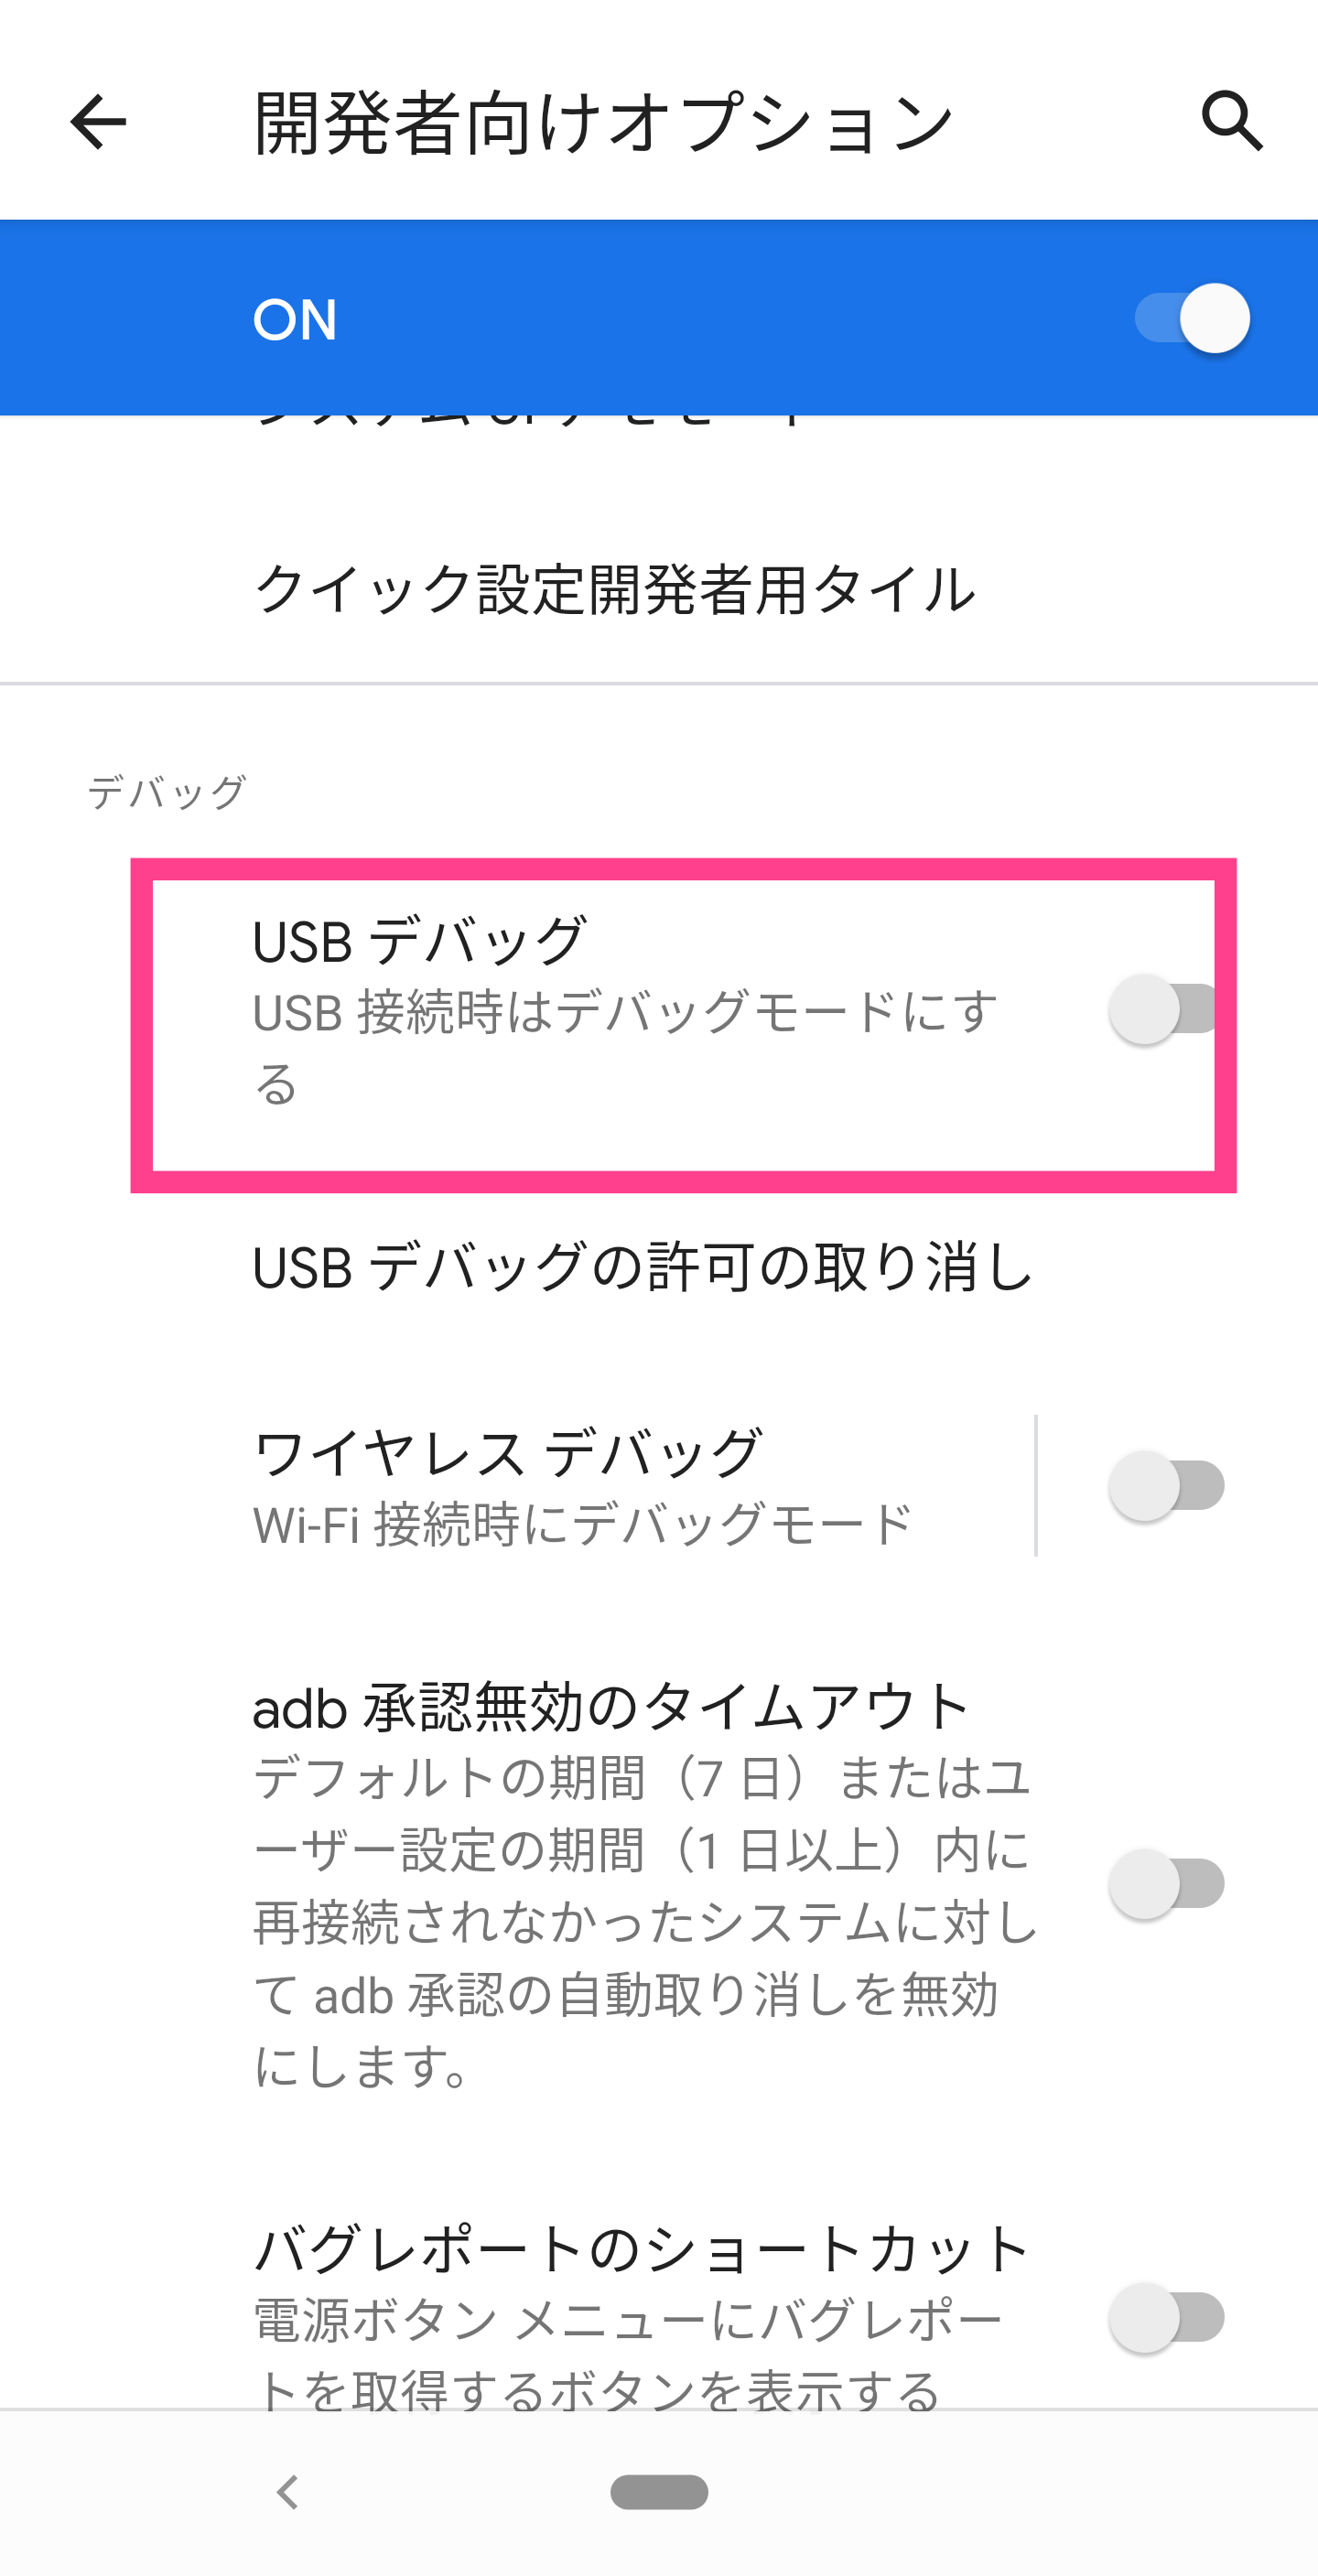 Android-USBデバッグ有効化